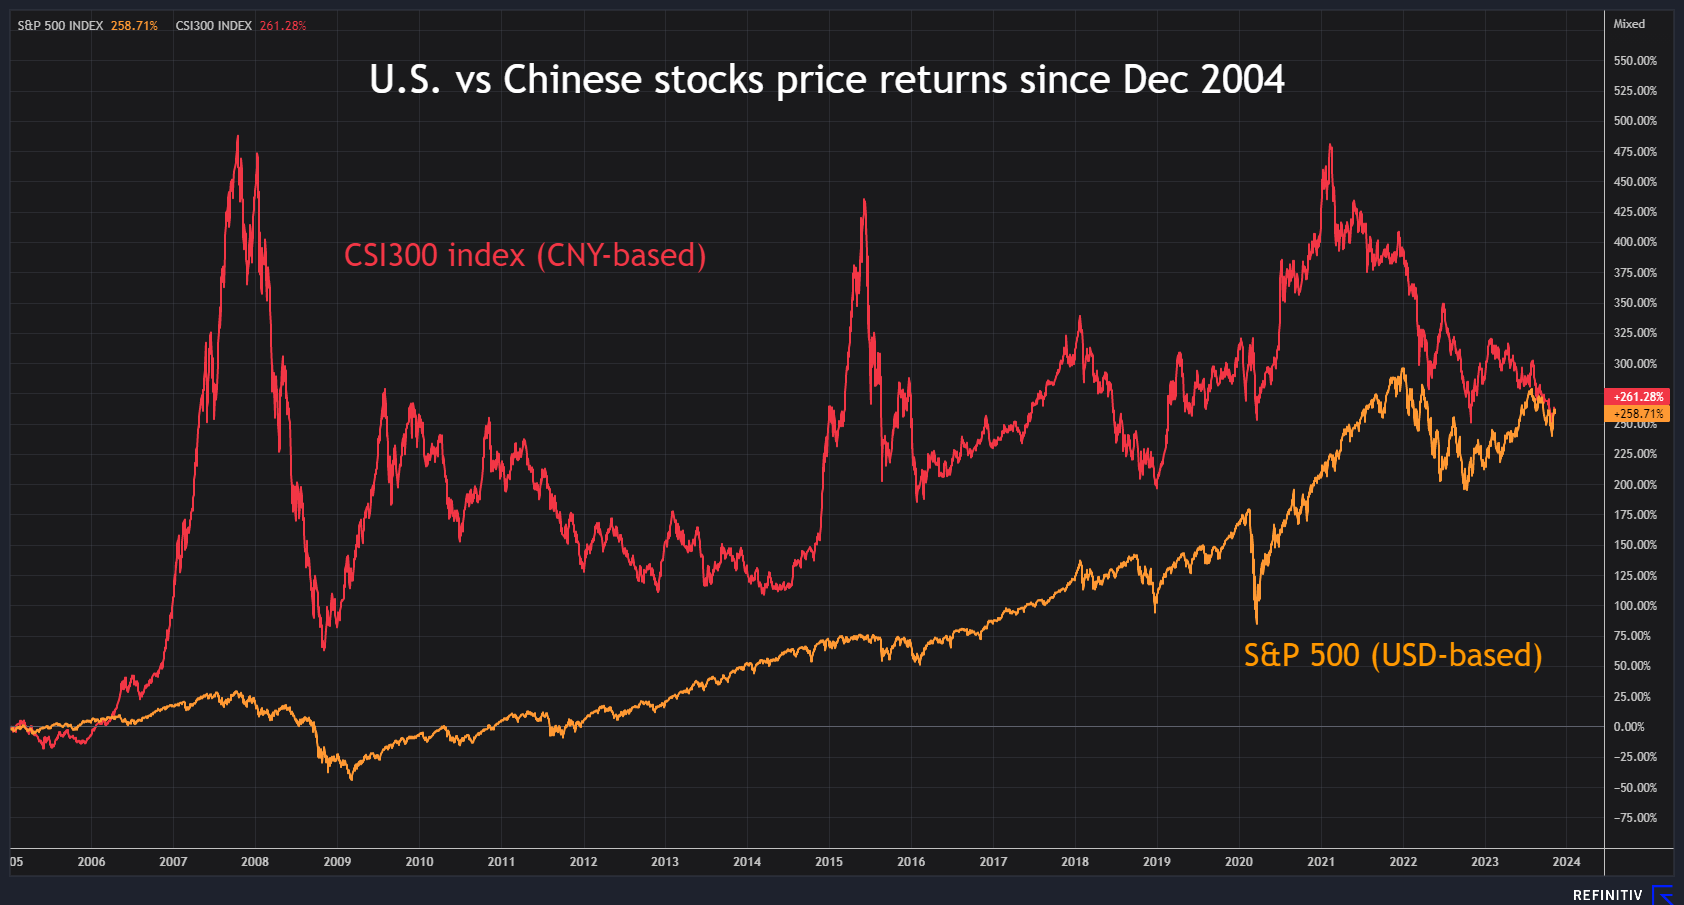 U.S. & Chinese stocks - Wall St catches up after 19 years